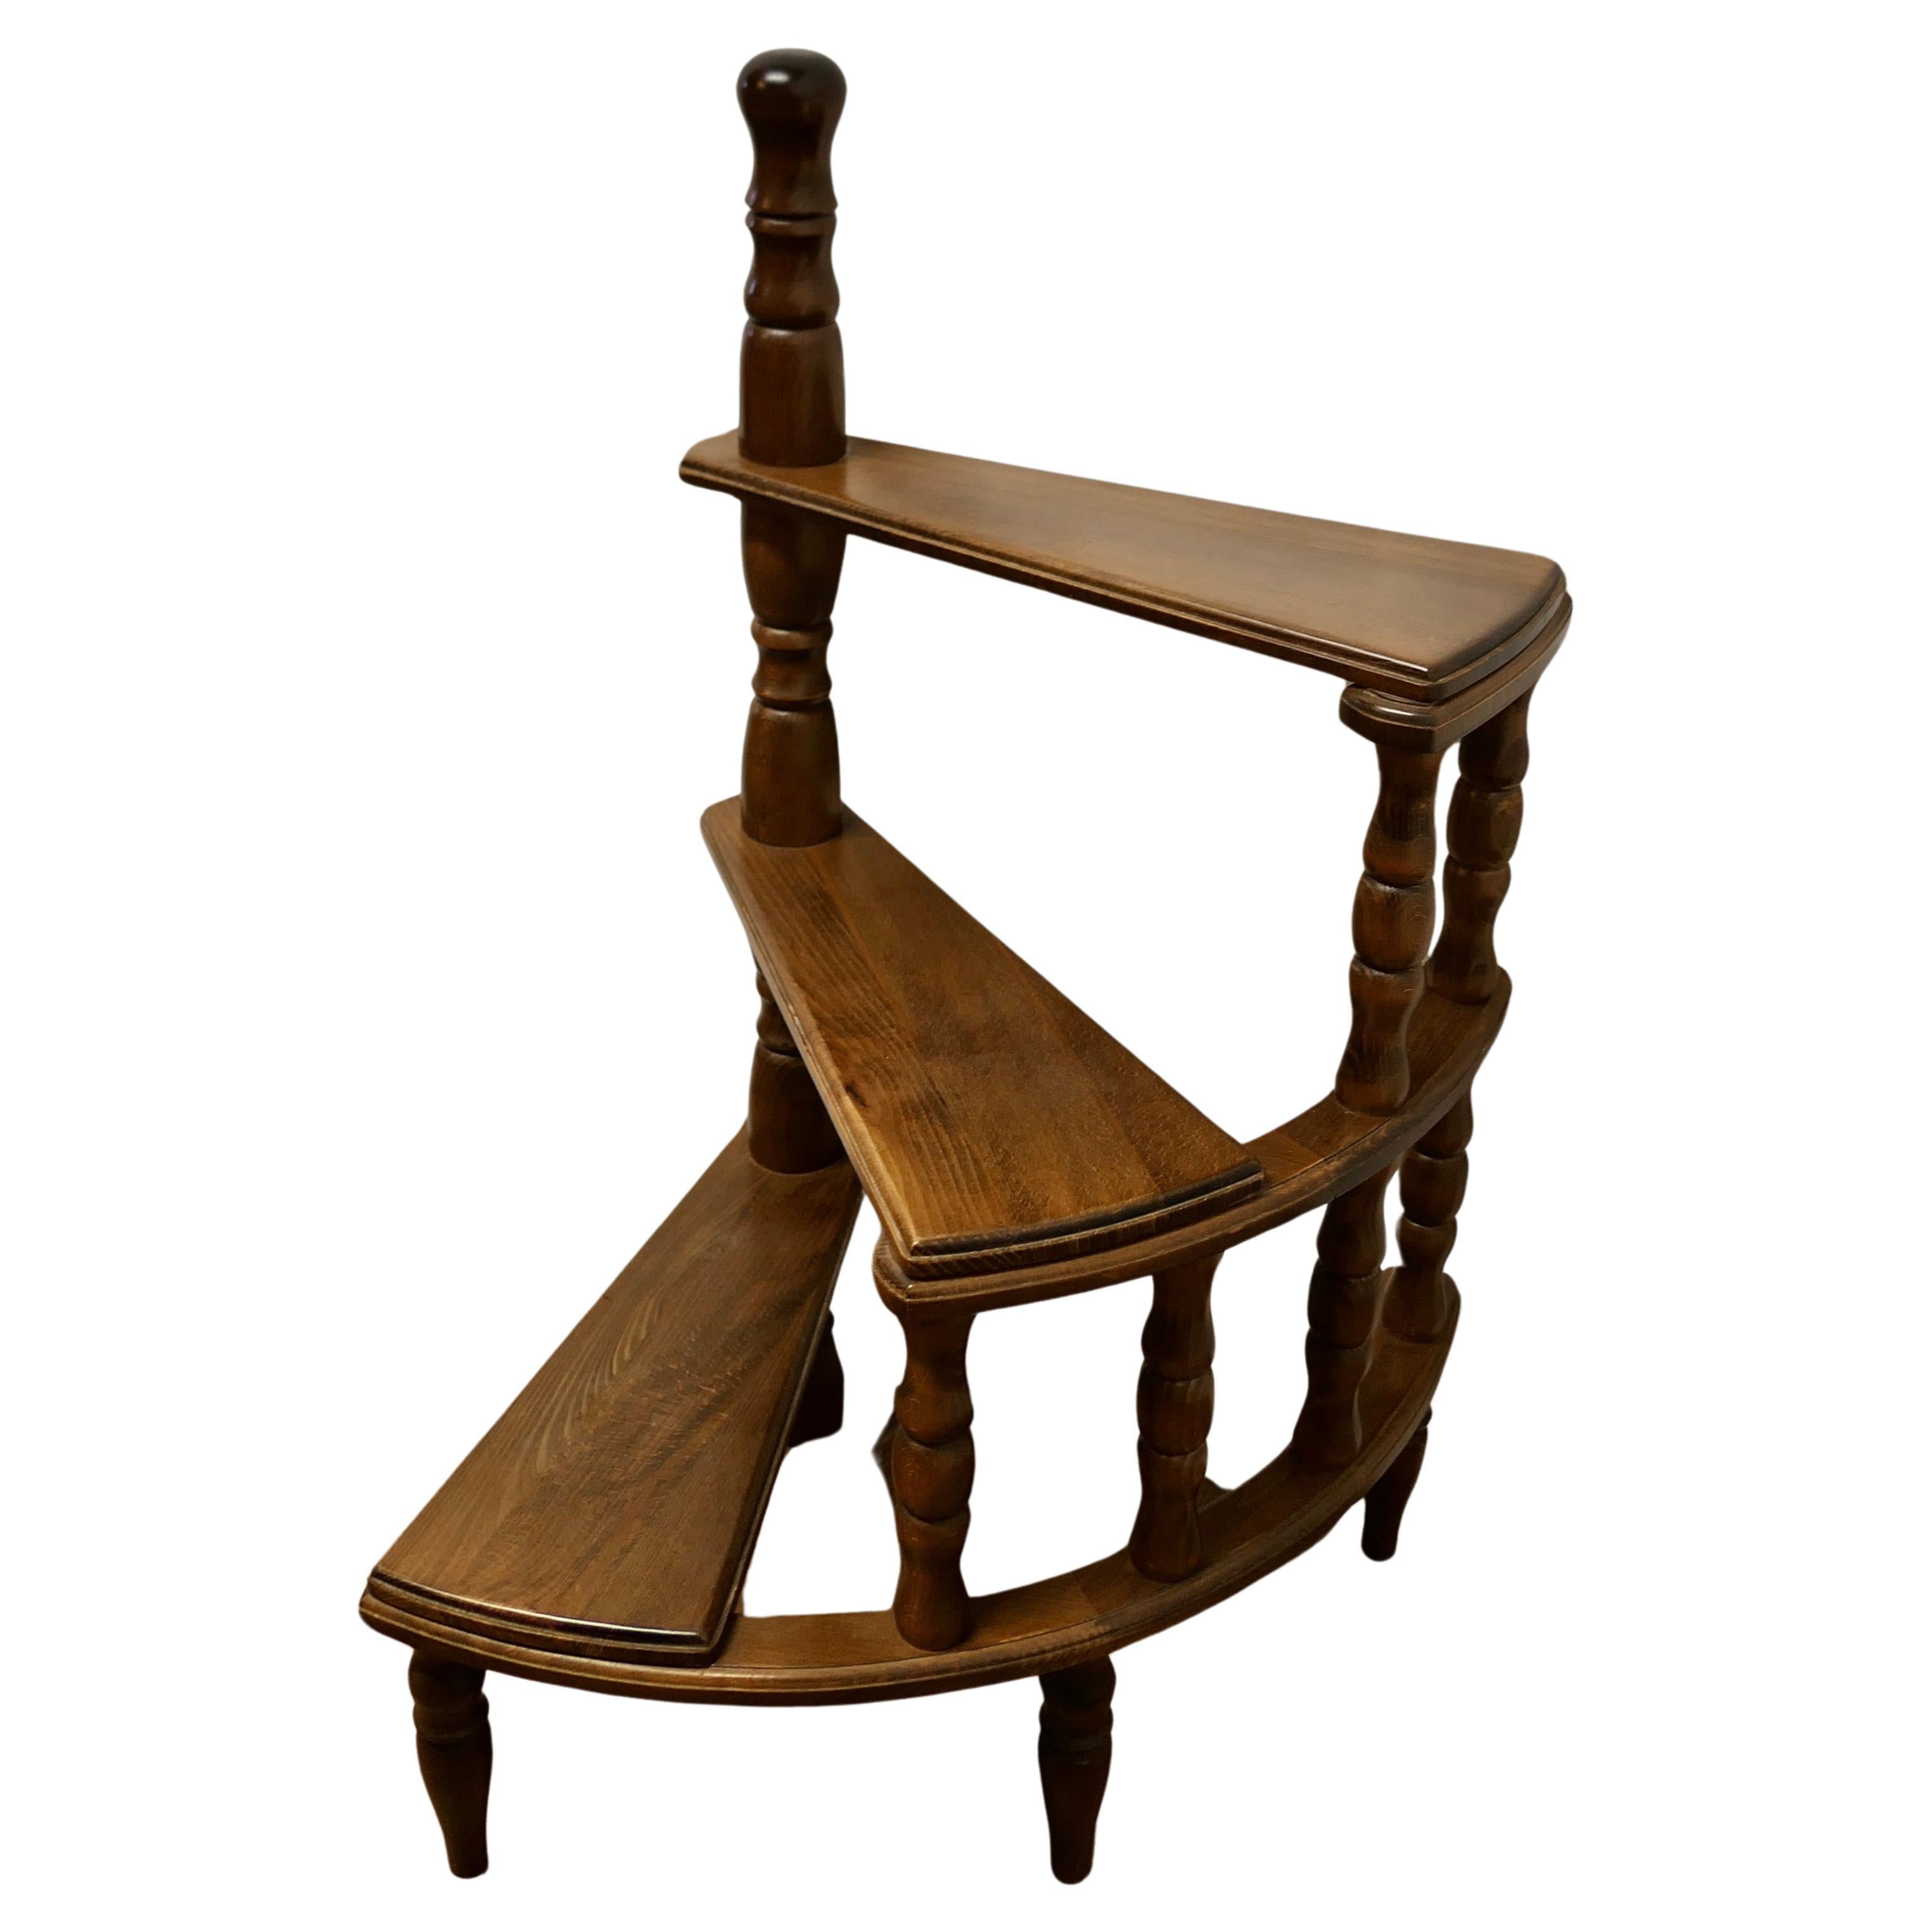 Spiral Library Steps with Turned Supports

A Great set of beech Library Steps, the 3 steps are in a spiral formation, they are in good condition, very sturdy and useful

An attractive and unusual piece, the step is 37” high overall and 20” in